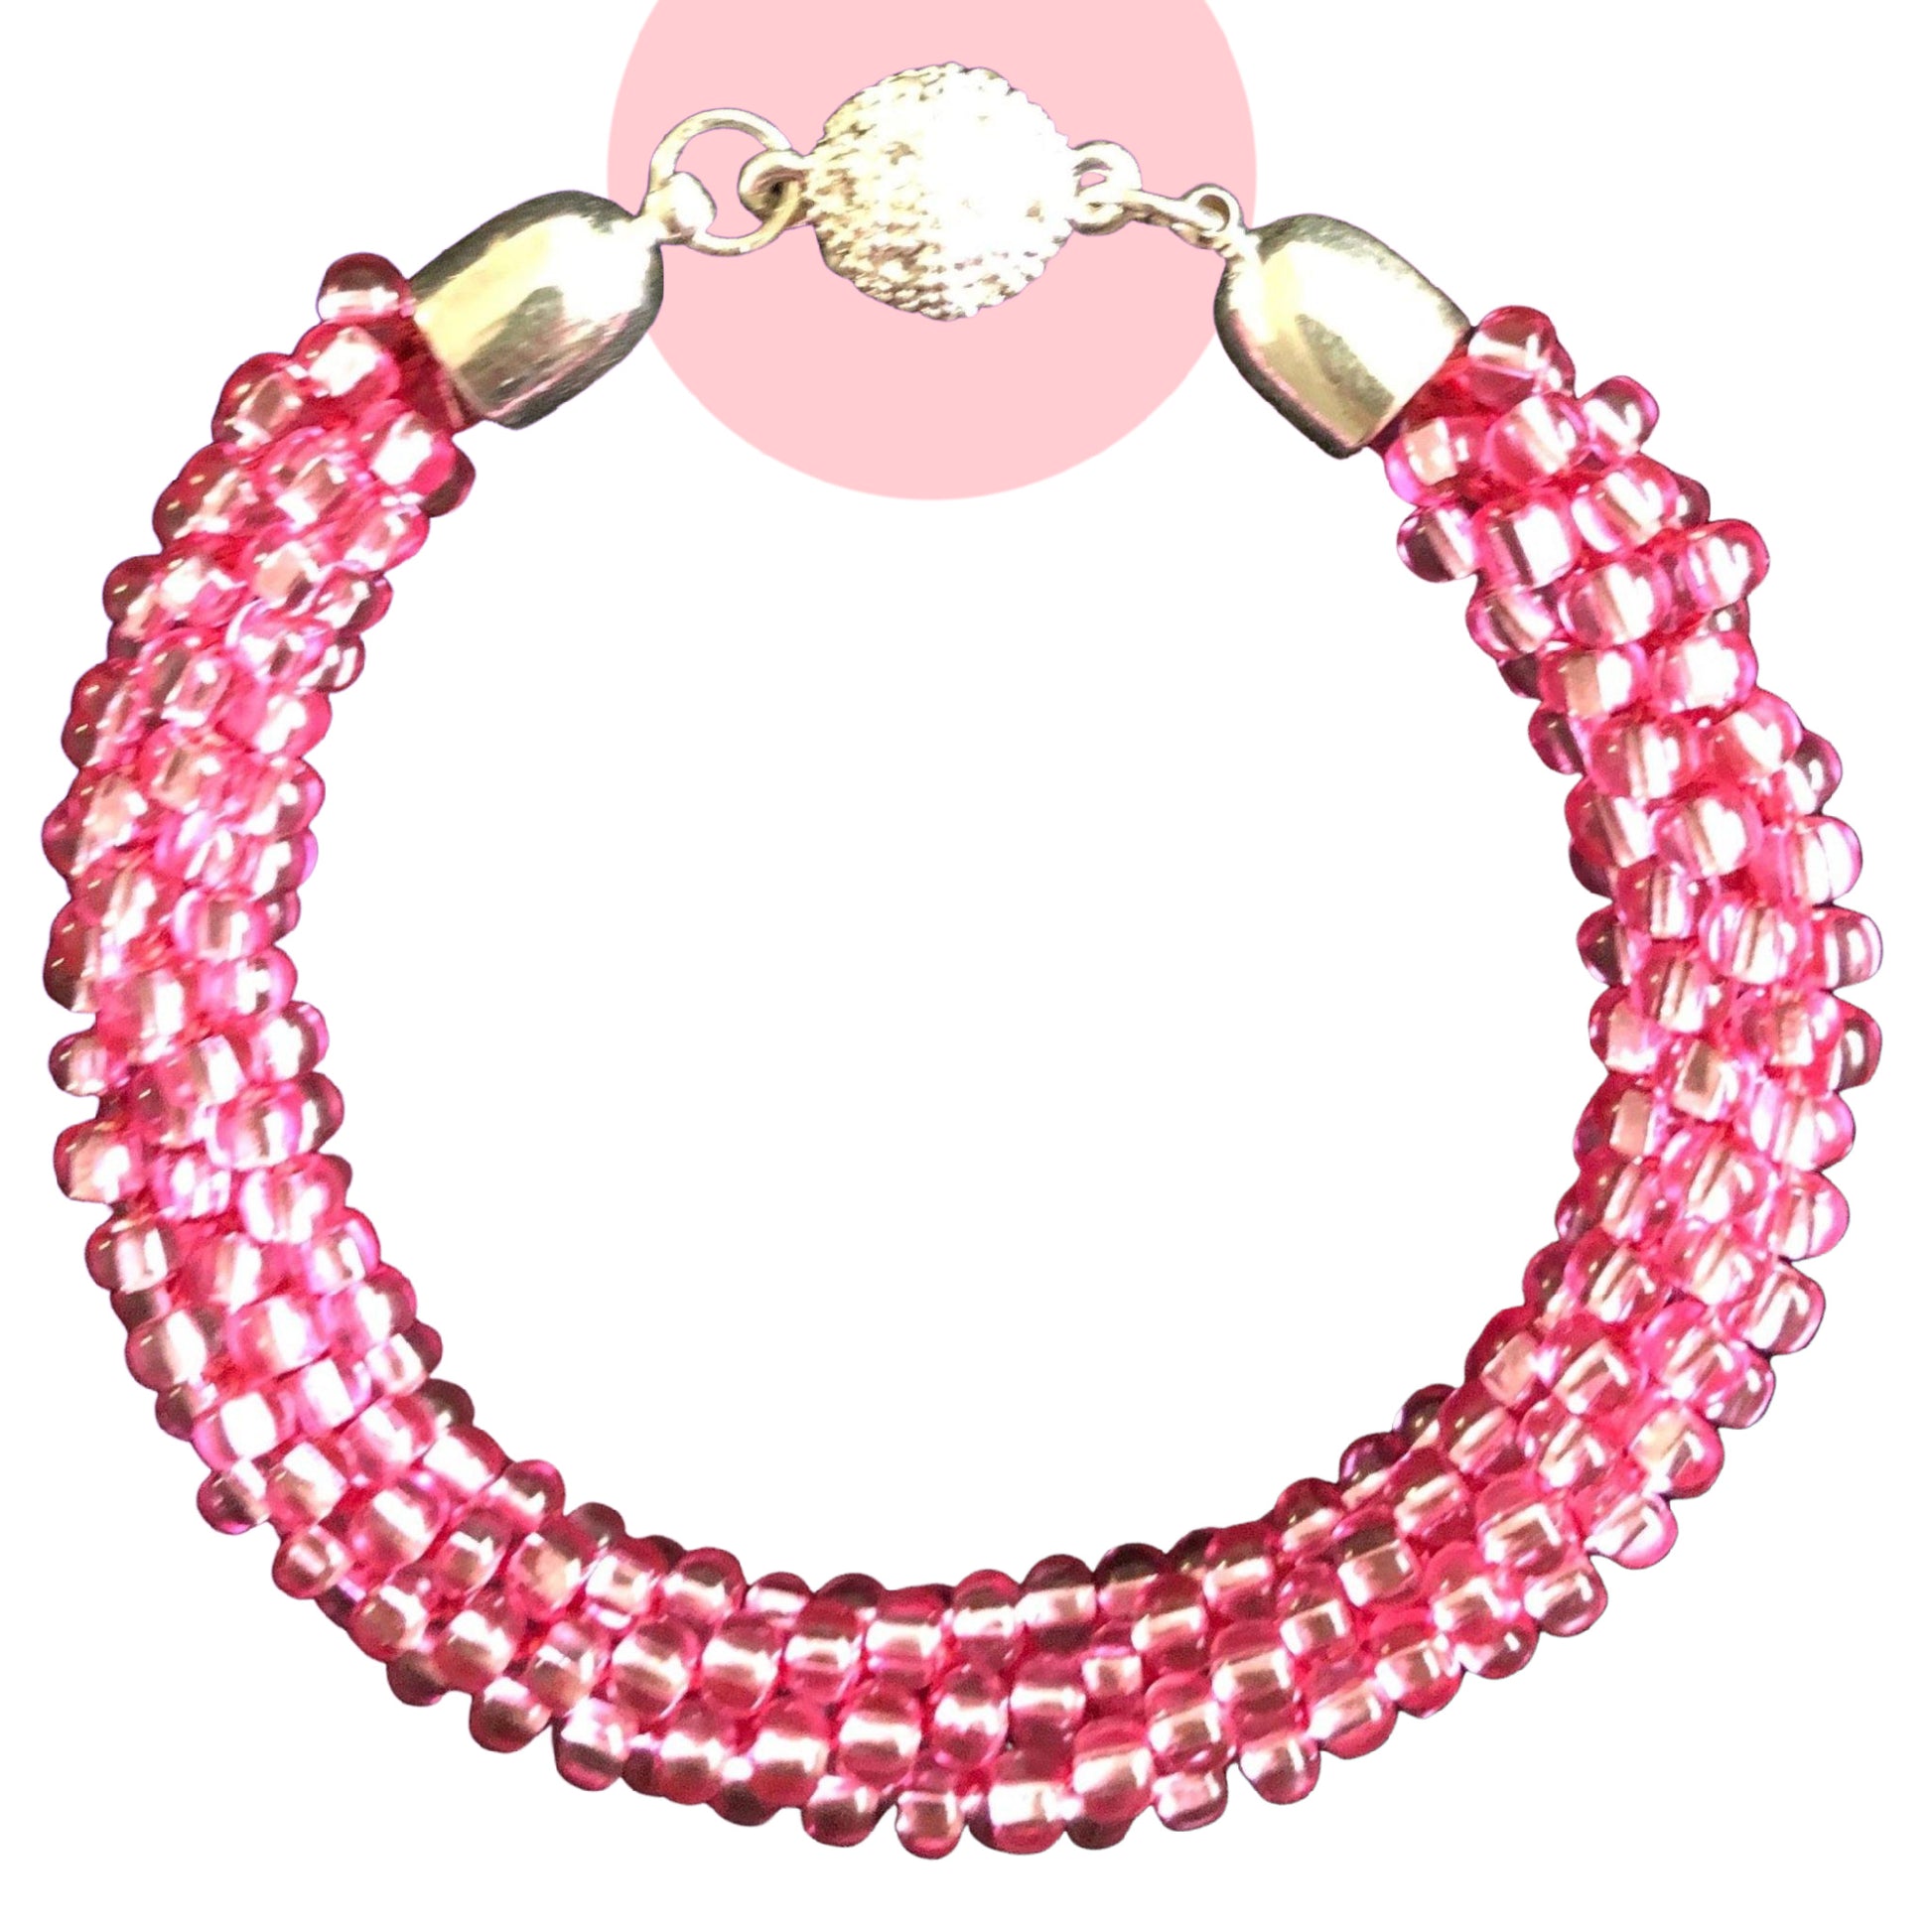 Bracelet with Magnetic Clasp hi-lited with pink background